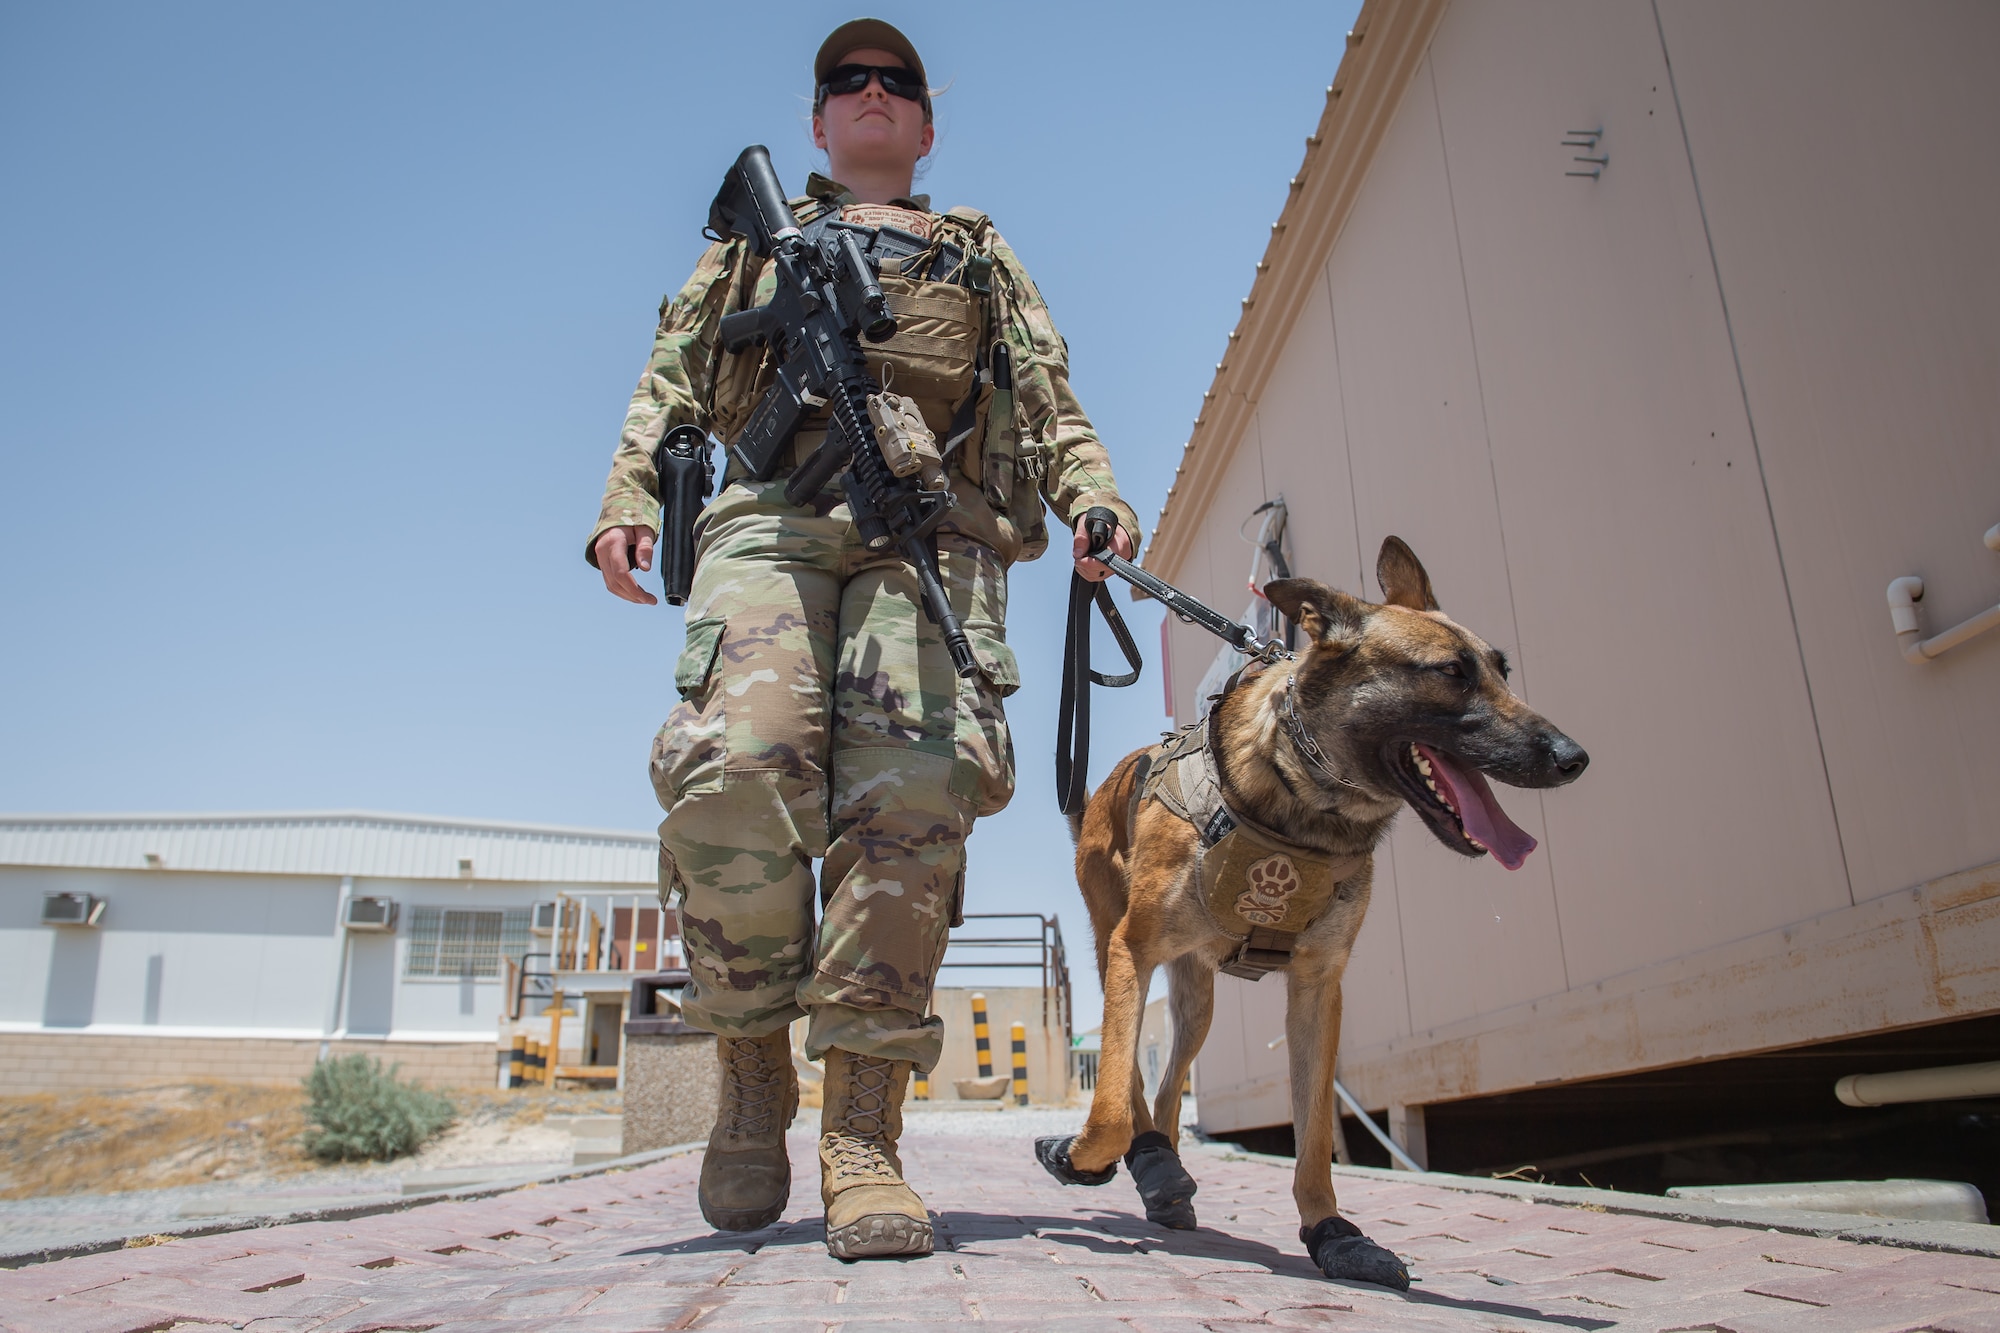 U.S. Air Force Staff Sgt. Kathyrn Malone, 386th Expeditionary Security Forces Squadron military working dog handler, walks her MWD, Uurska, while conducting a foot patrol at Ali Al Salem Air Base, Kuwait, July 24, 2019. Malone and Uurska are both deployed from the 55th Security Forces Squadron, Offutt Air Force Base, Neb. (U.S. Air Force photo by Tech. Sgt. Daniel Martinez)